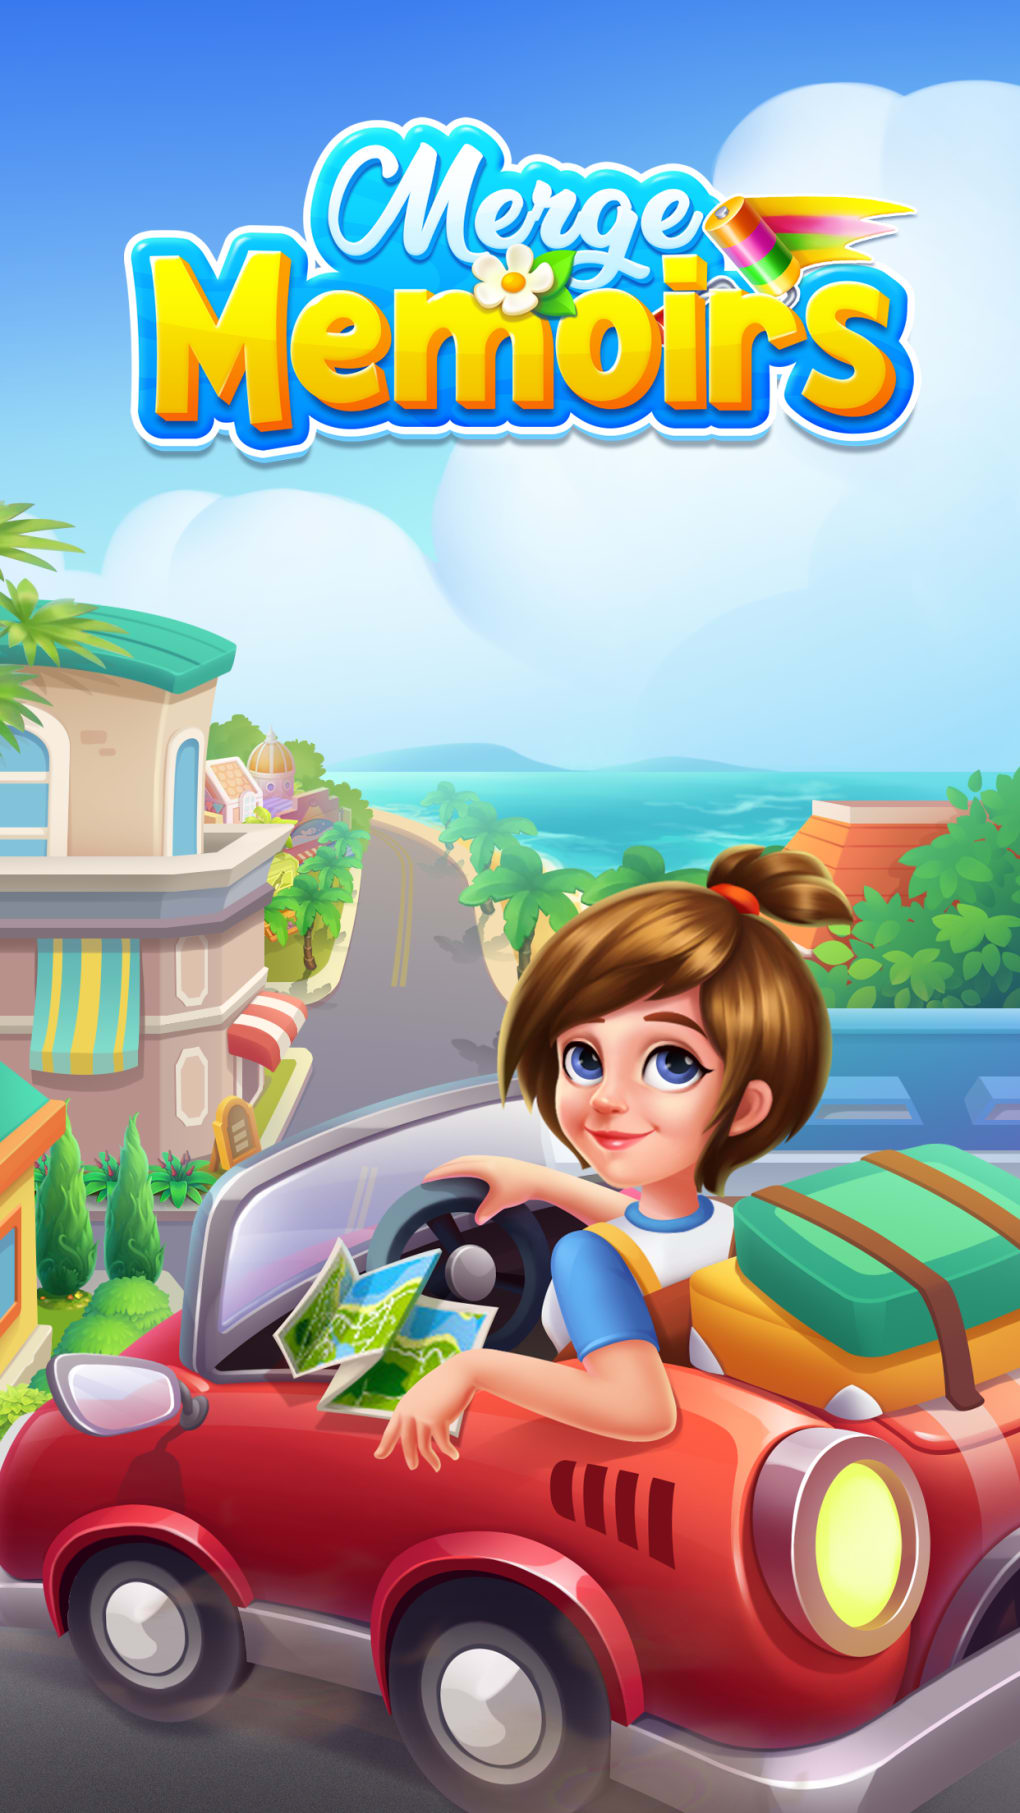 THE GAME OF LIFE 2 APK + Mod 0.4.6 - Download Free for Android